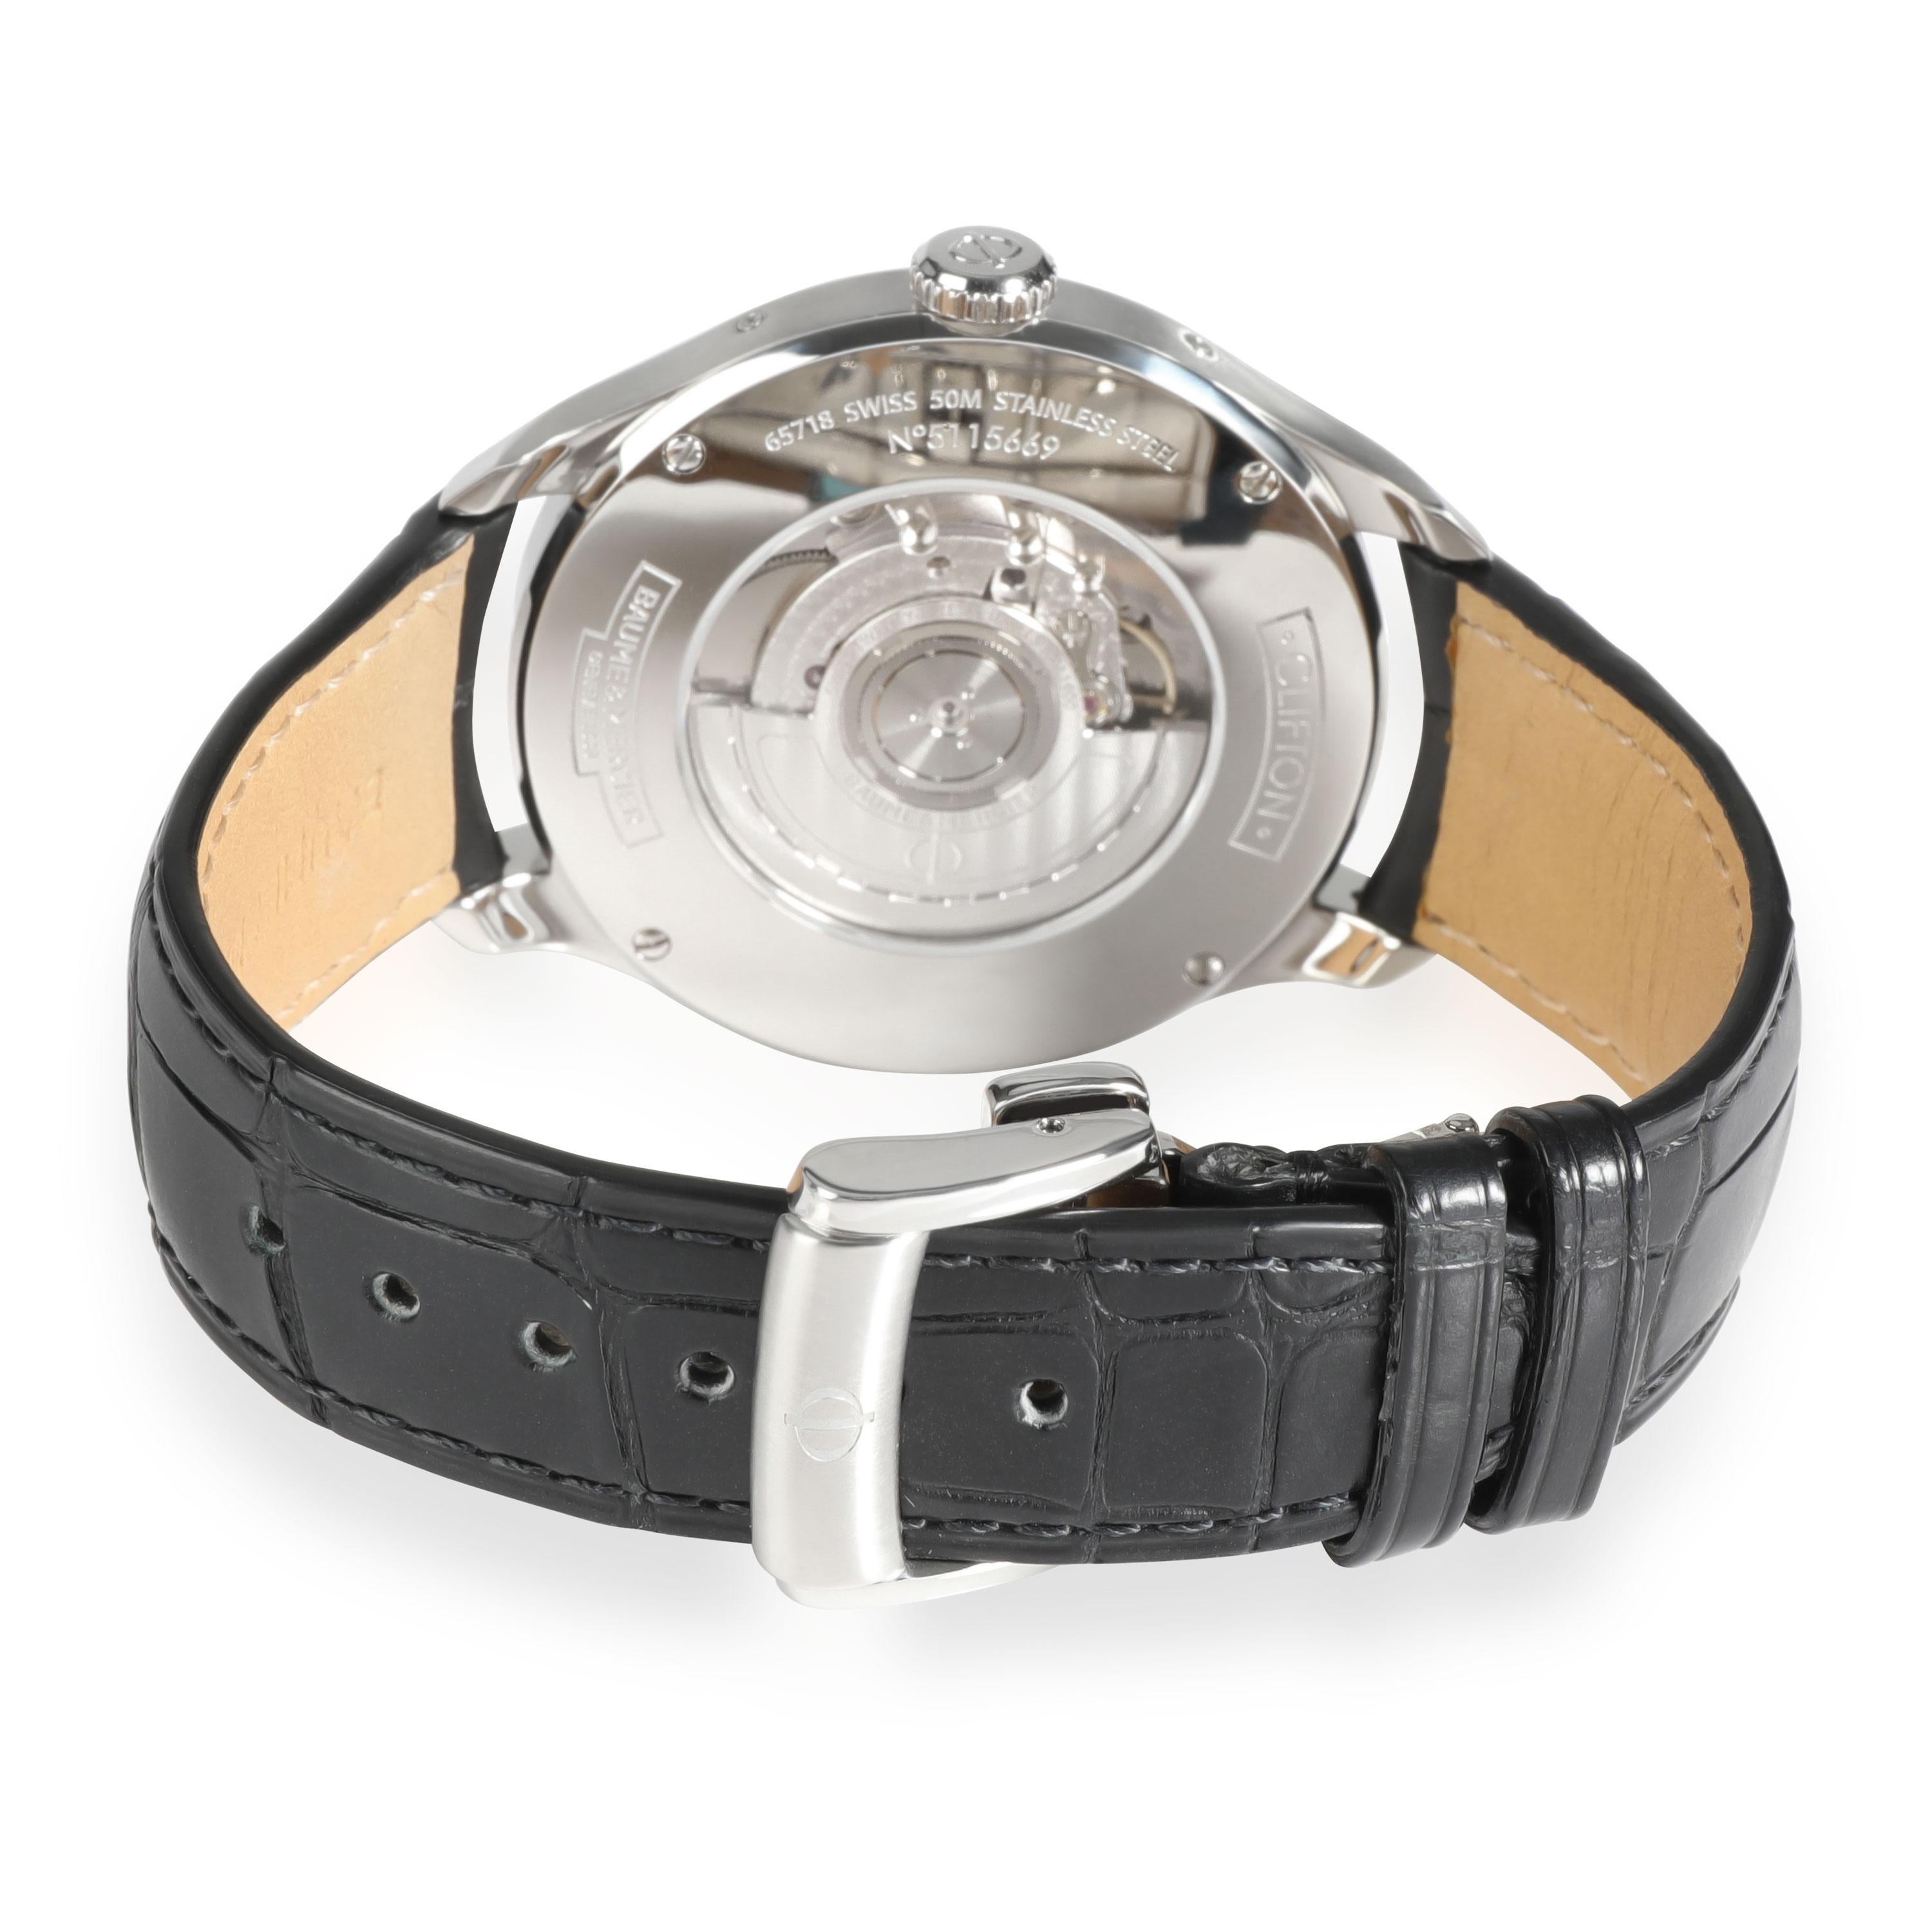 Baume & Mercier Clifton MOA10055 Men's Watch in Stainless Steel

SKU: 109570

PRIMARY DETAILS
Brand:  Baume & Mercier
Model: Clifton
Country of Origin: Switzerland
Movement Type: Mechanical: Automatic/Kinetic
Year Manufactured: 
Year of Manufacture: